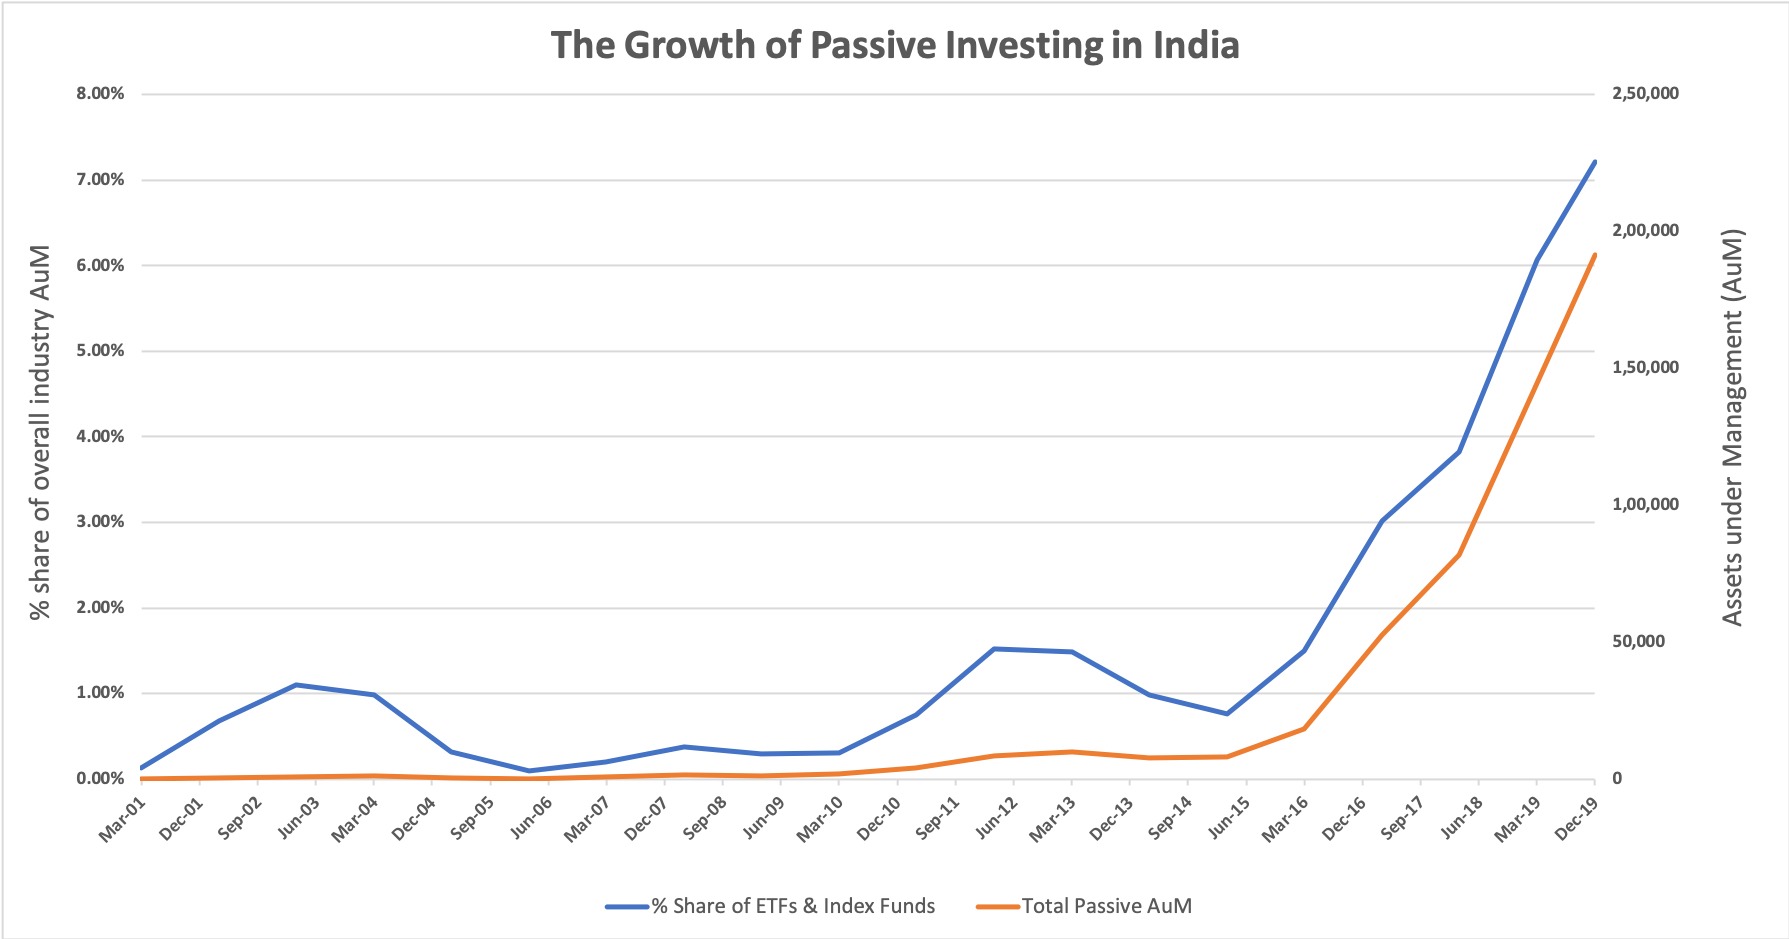 The growth of passive investing in India